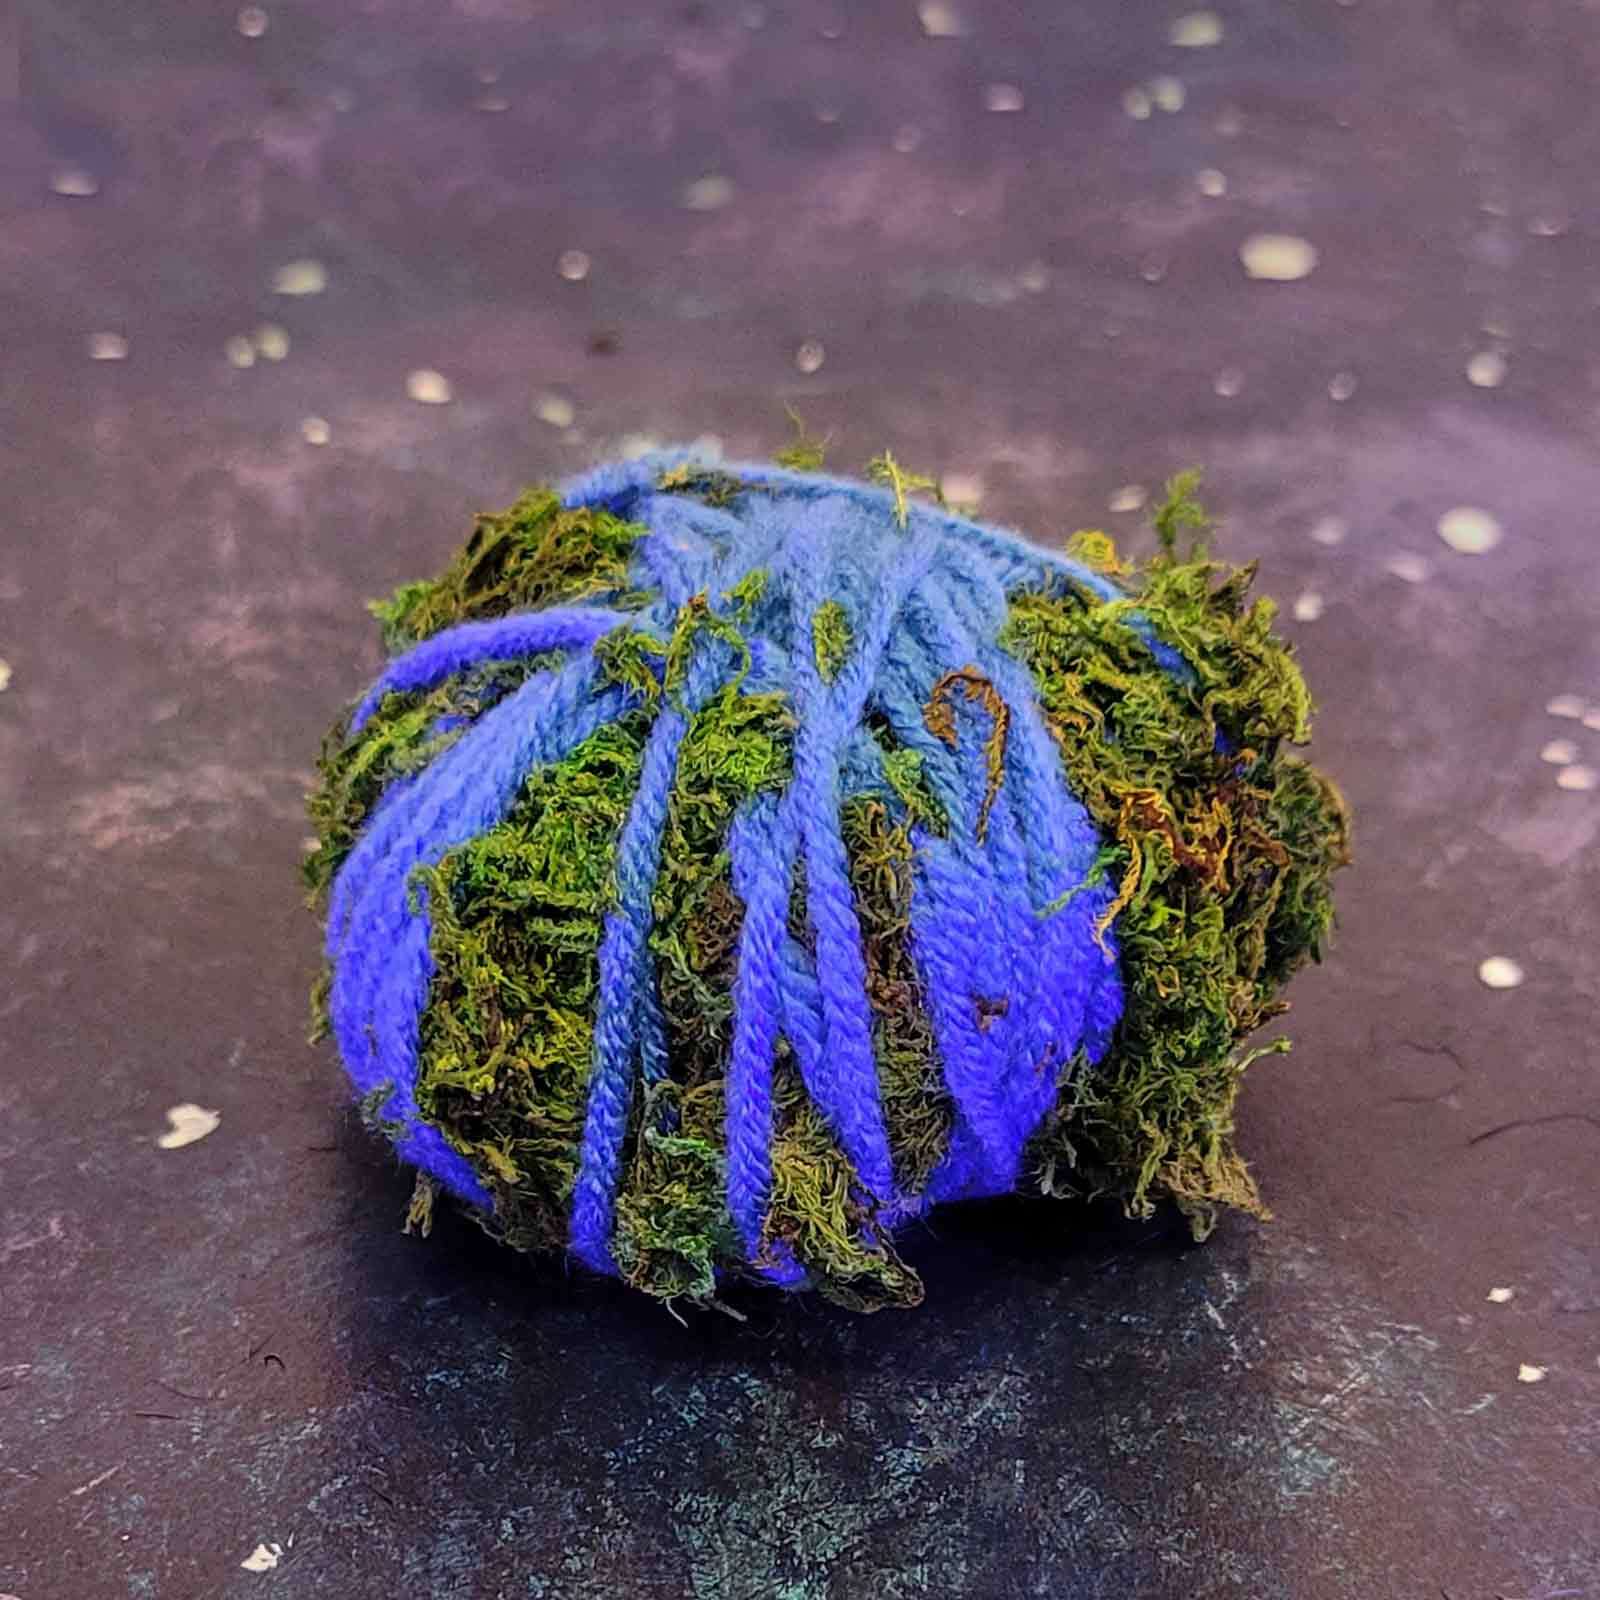 A green mossy item decorated with strands of blue yarn, set against a dappled dark backdrop.